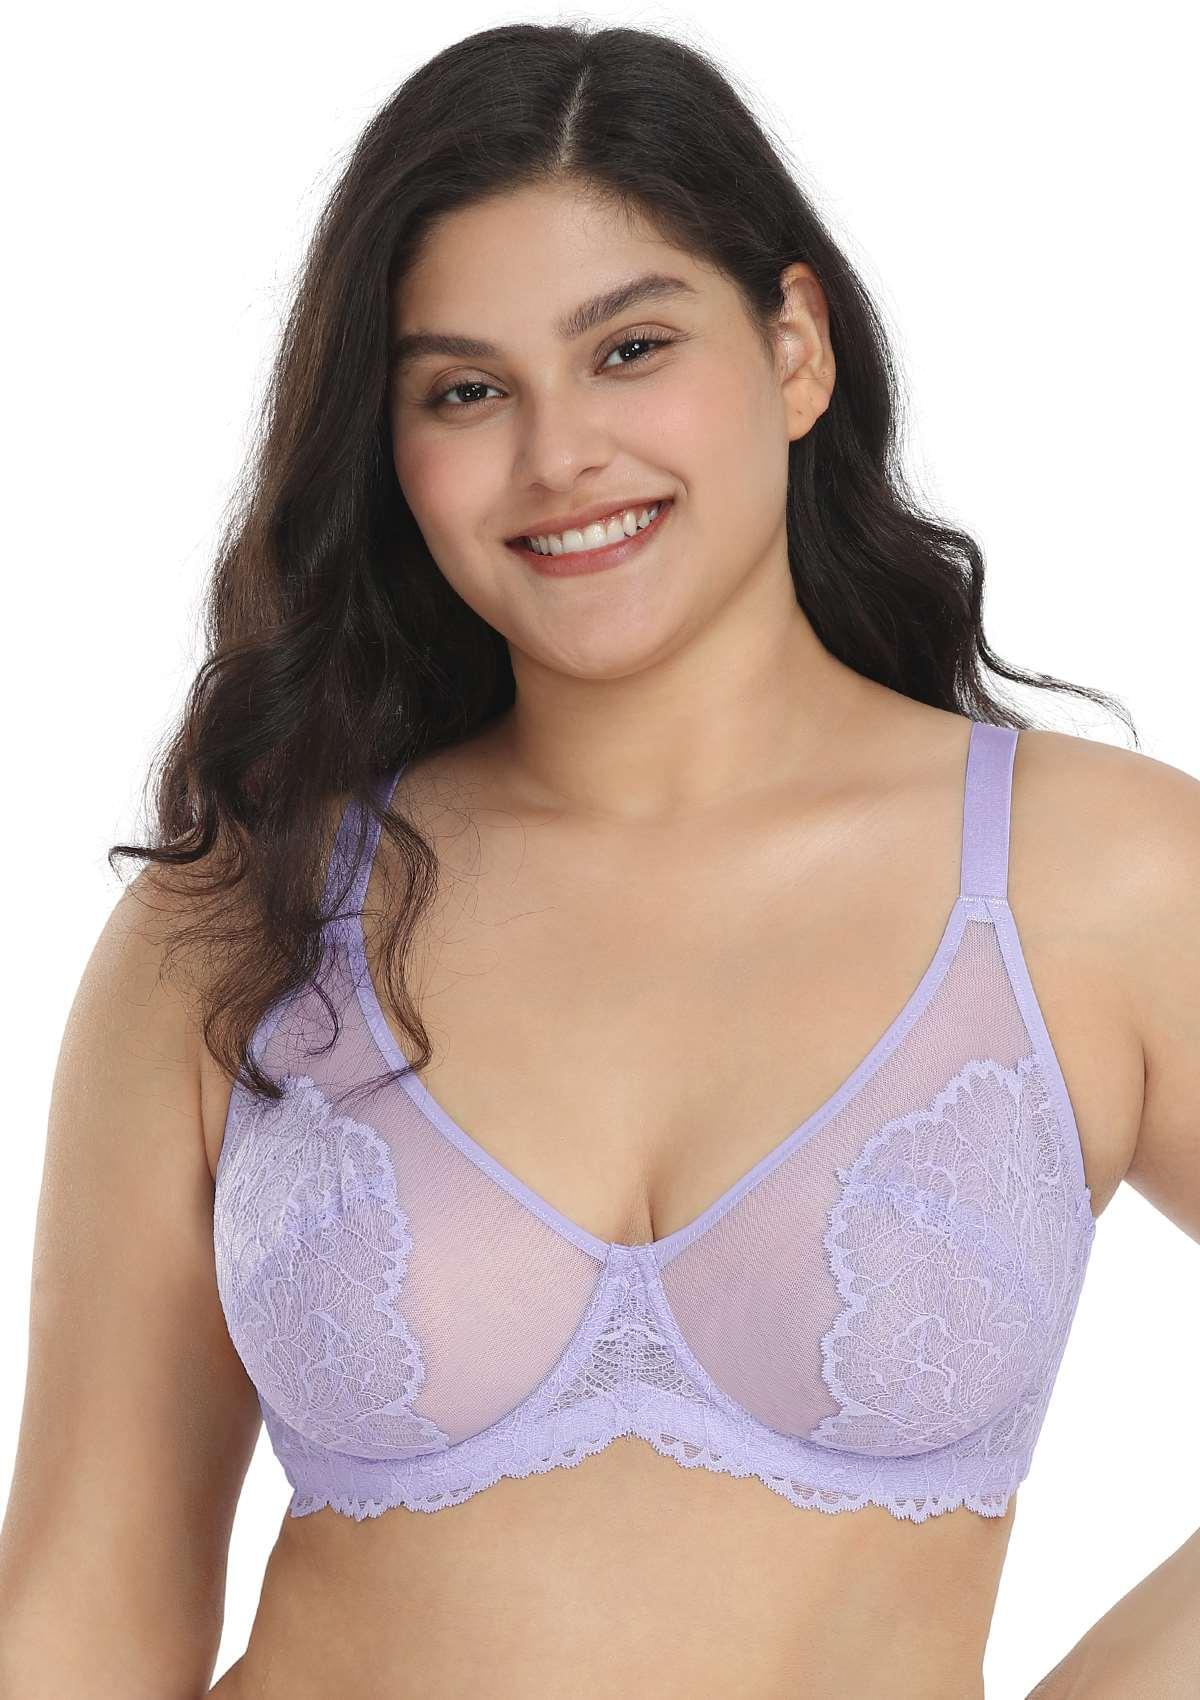 HSIA Blossom Transparent Lace Bra: Plus Size Wired Back Smoothing Bra - Light Purple / 40 / DDD/F